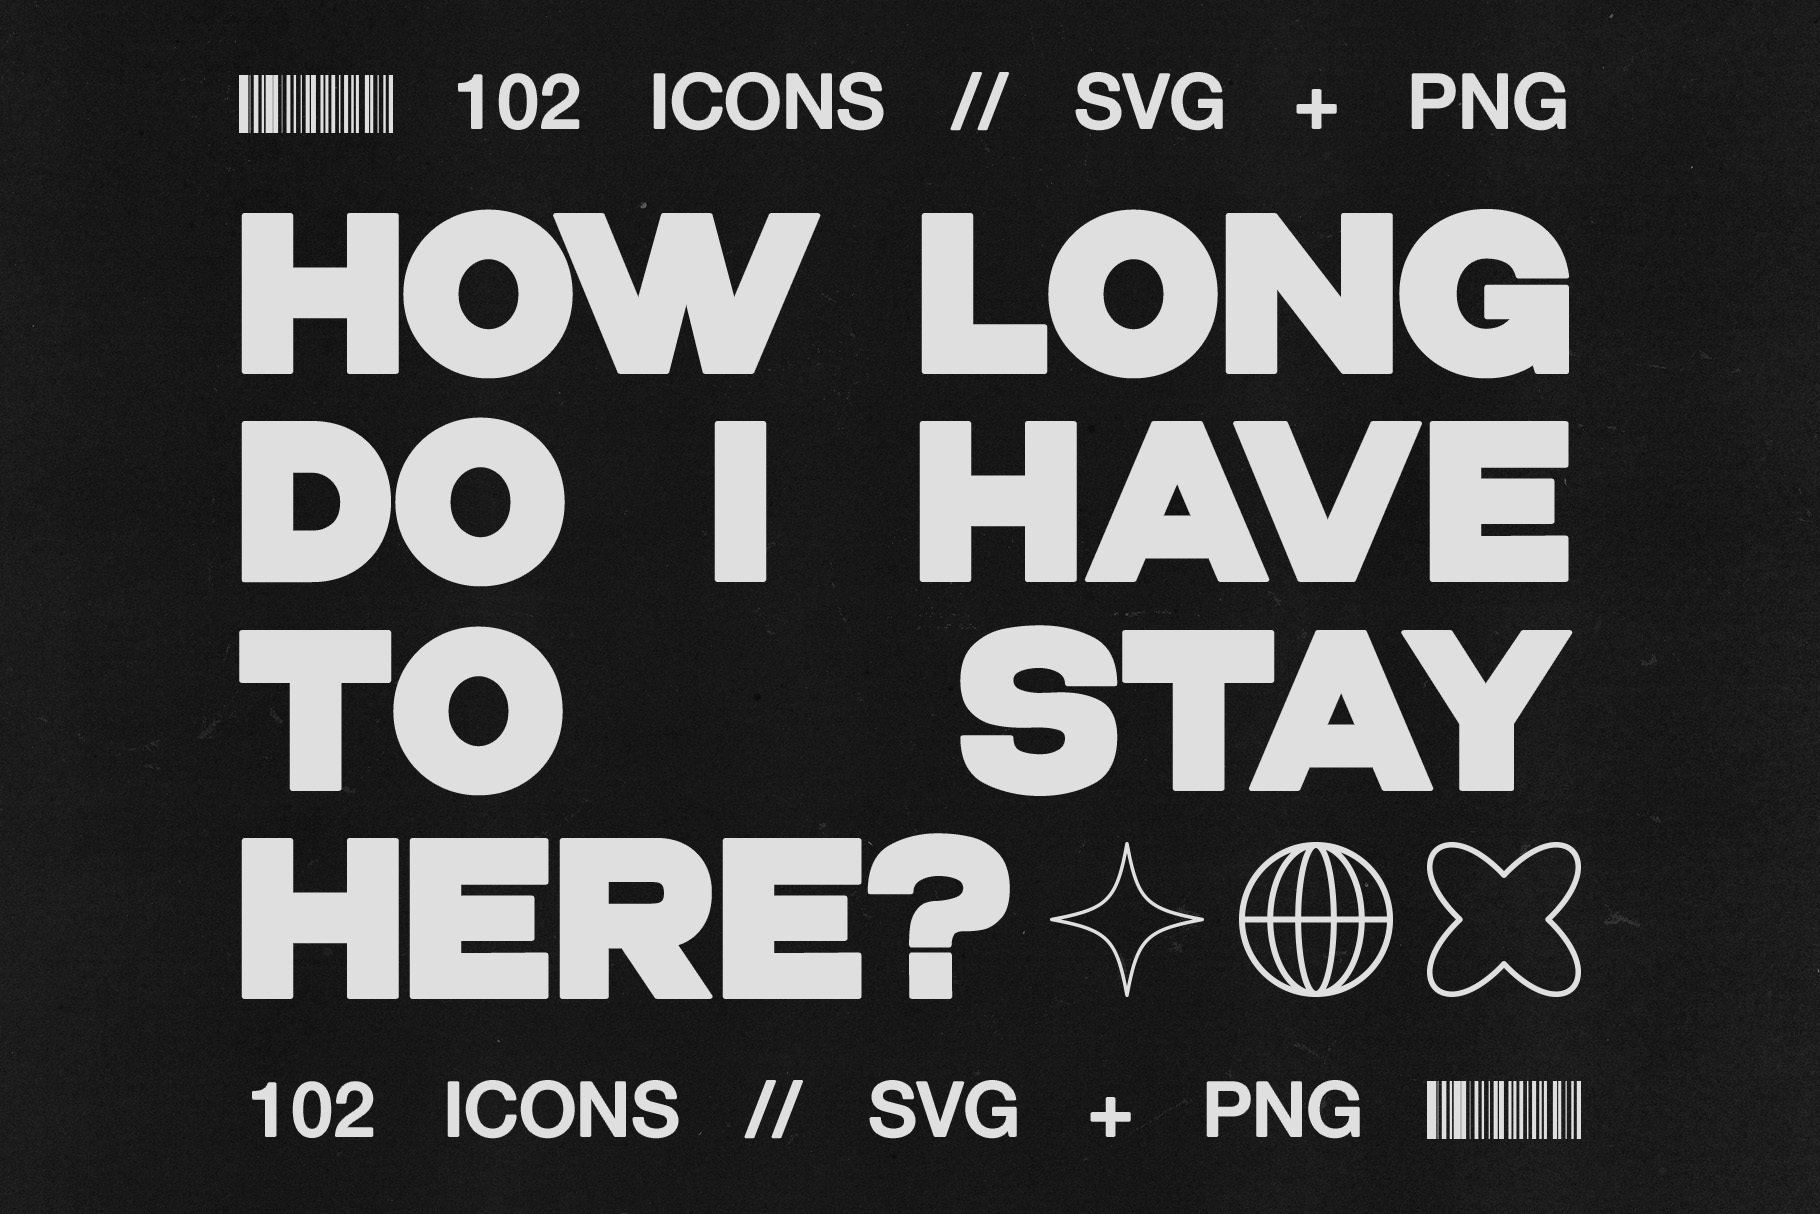 hvnter. on Instagram: “y2k Icon Pack 💫 includes 80 vectors/png's (1200ppi)  will be availabl…